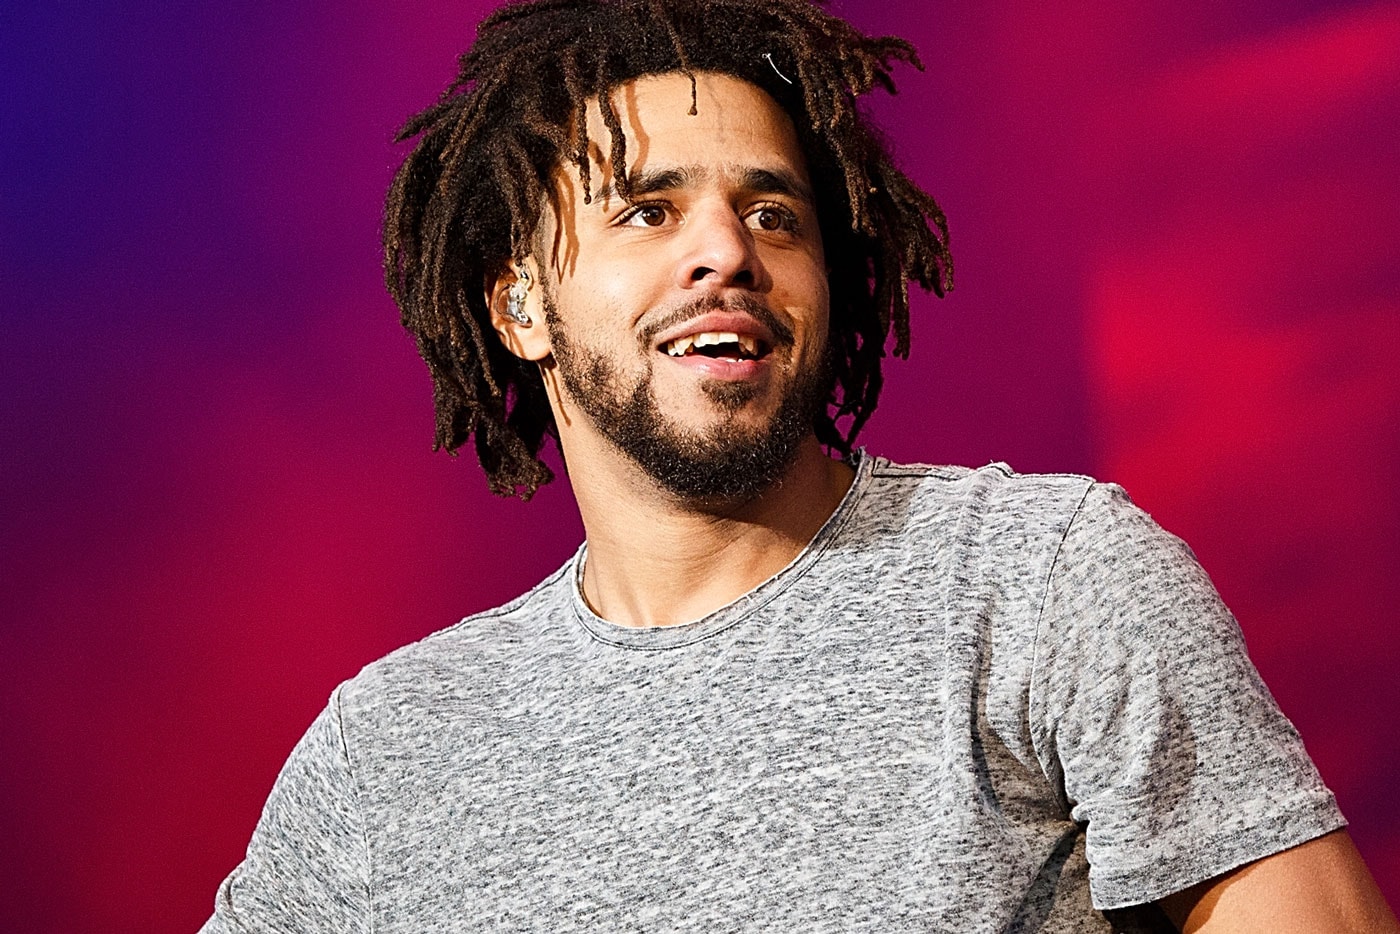 J.Cole Releases Music Videos For "Everybody Dies" & "False Prophets" Music 4 Your Eyez Only